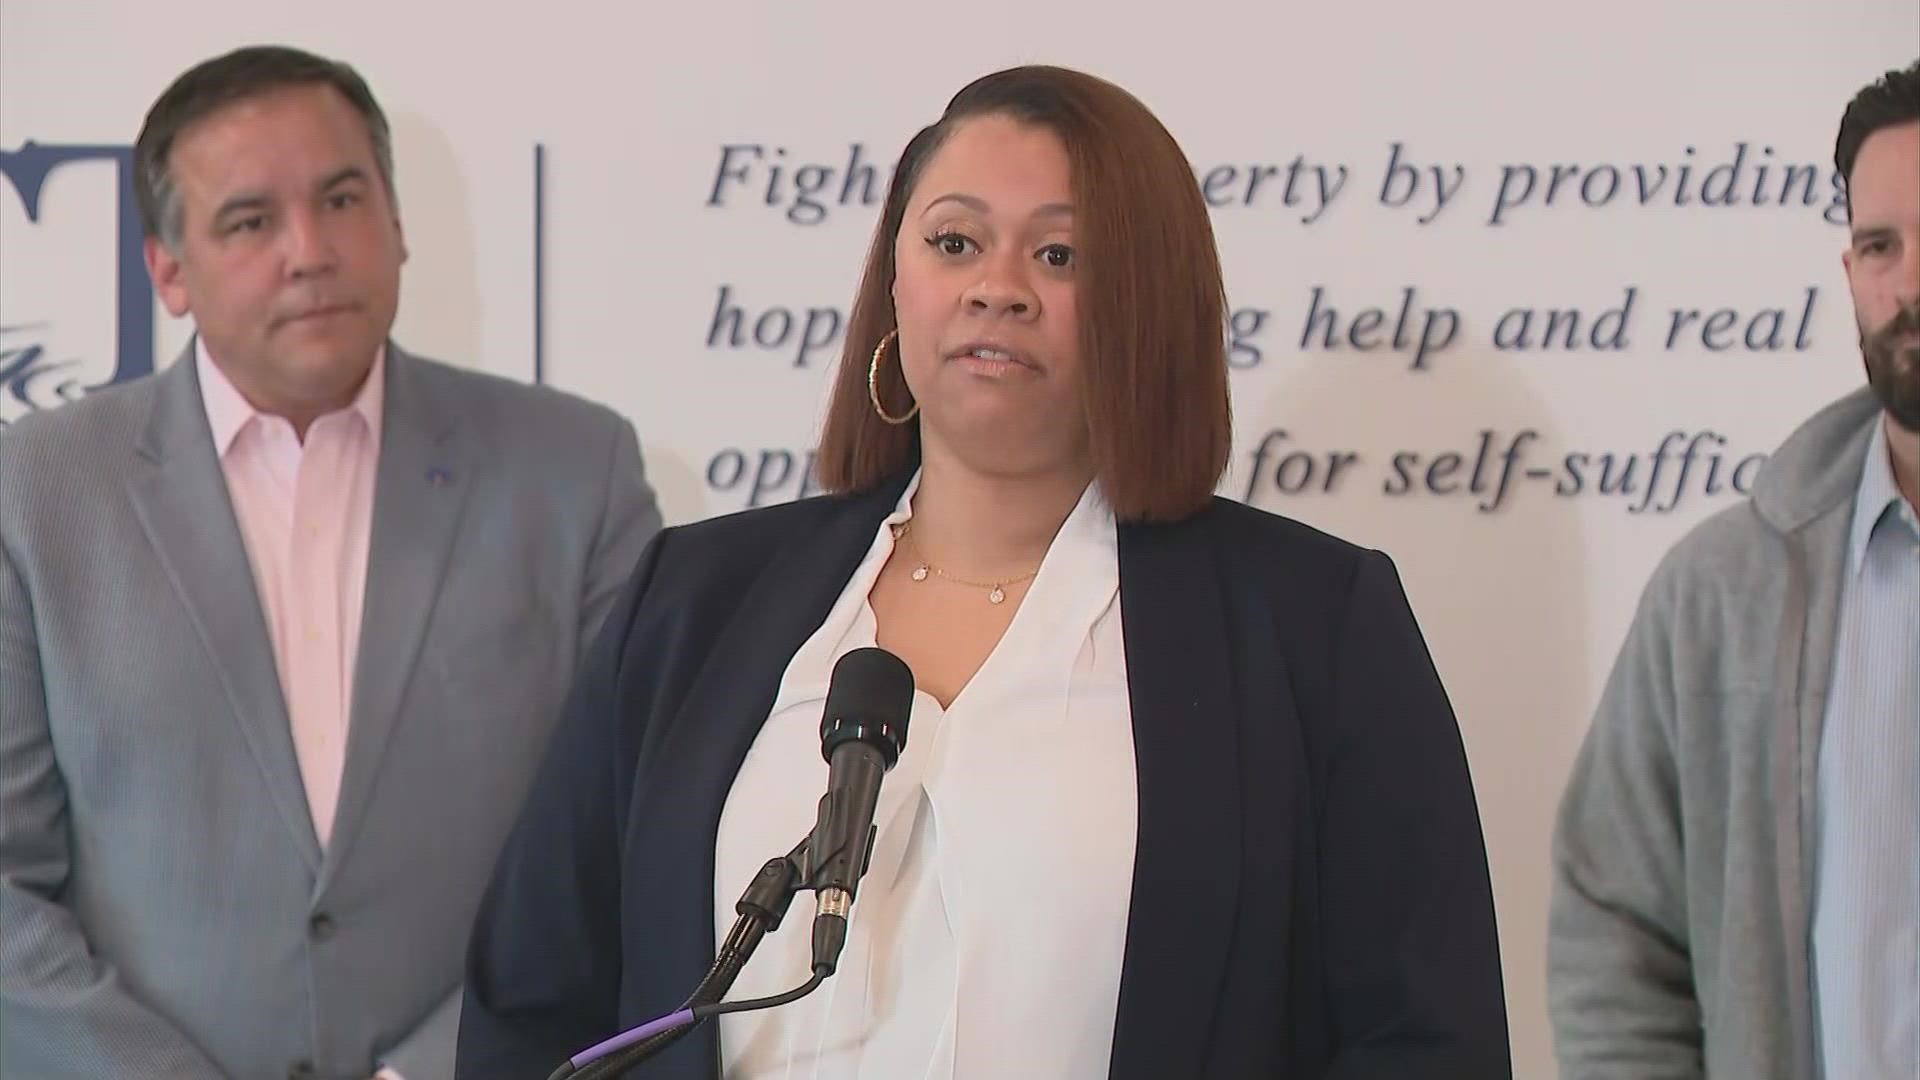 City leaders announced a new jobs program on Thursday aimed at connecting Columbus residents with training and experience in the clean-energy sector.